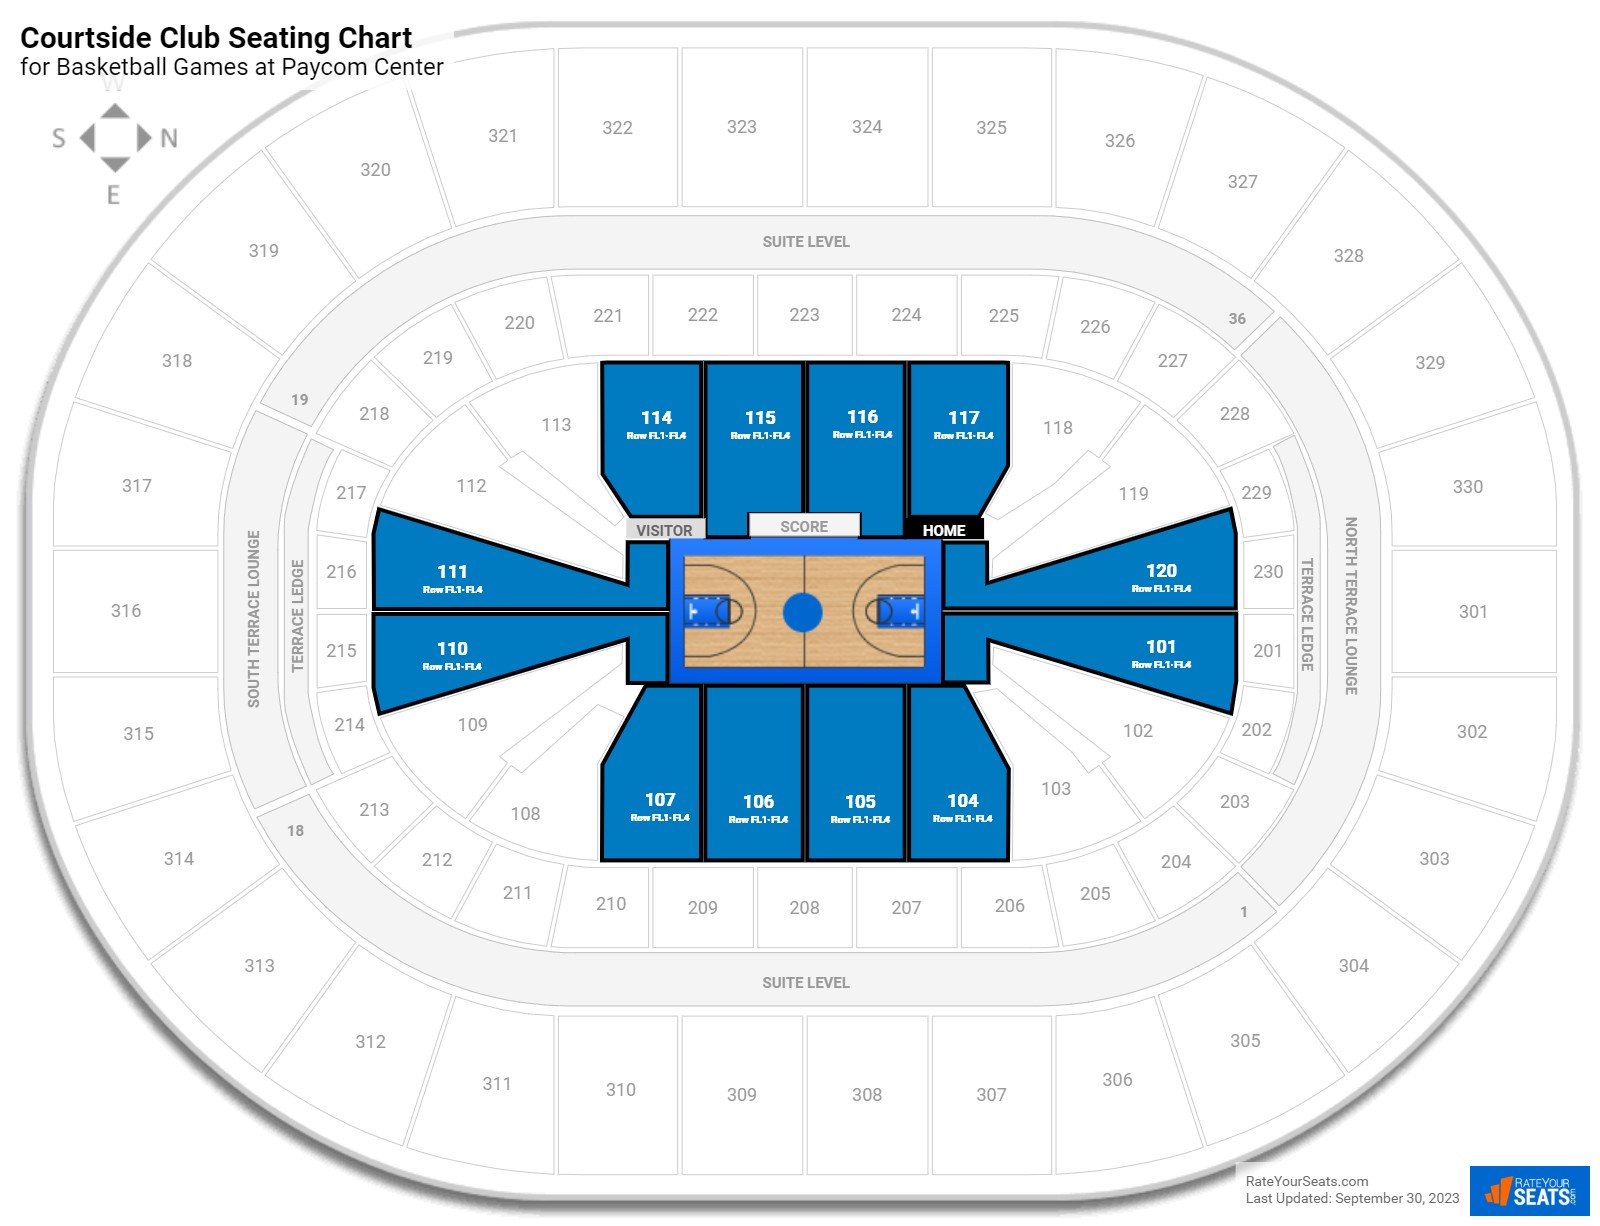 Basketball Courtside Club Seating Chart at Paycom Center